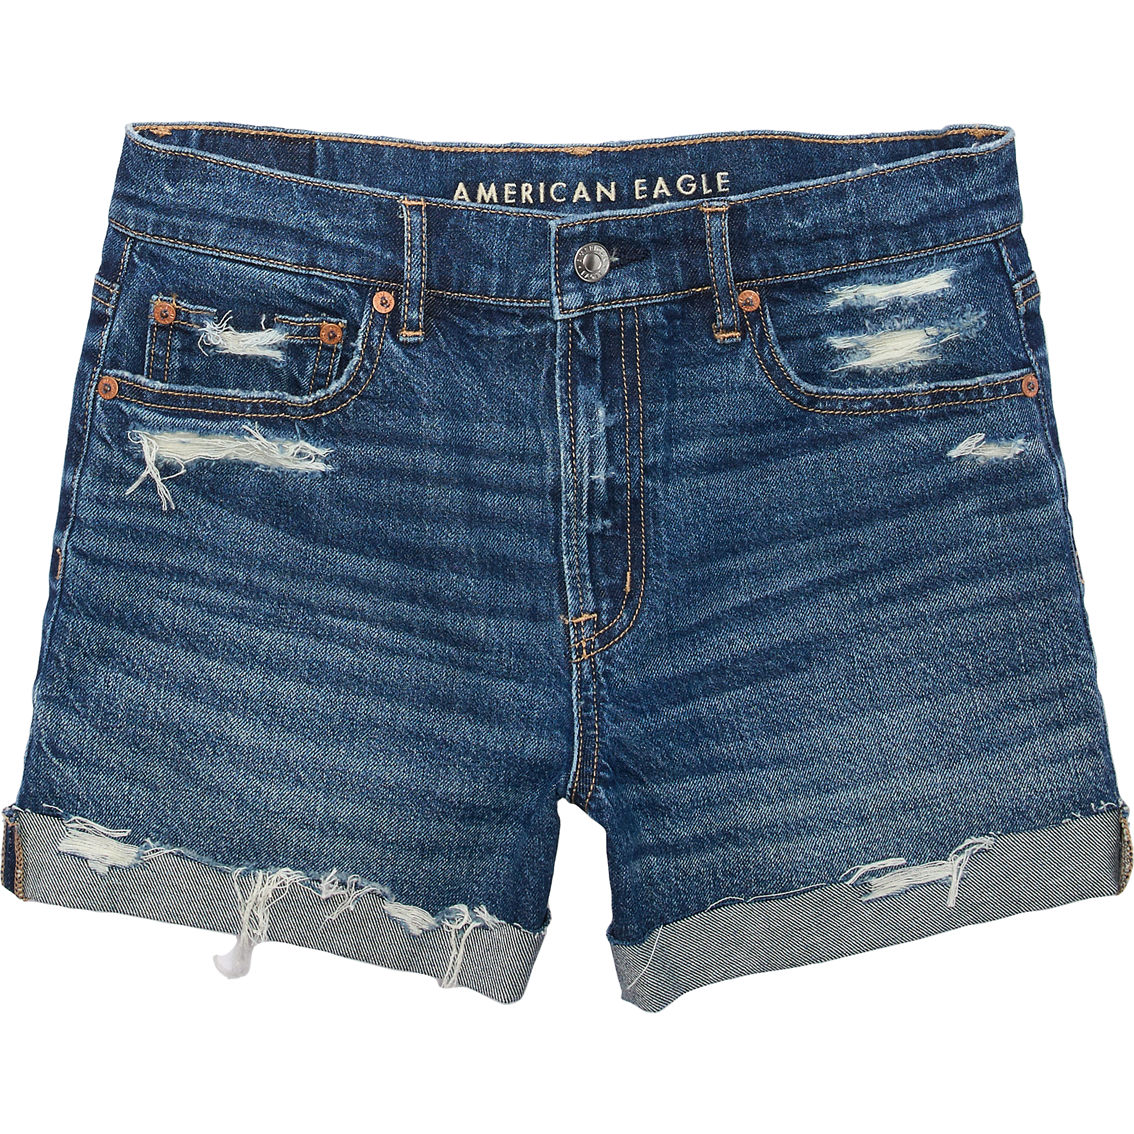 American Eagle Strigid Perfect 4 in. Ripped Denim Shorts - Image 4 of 5